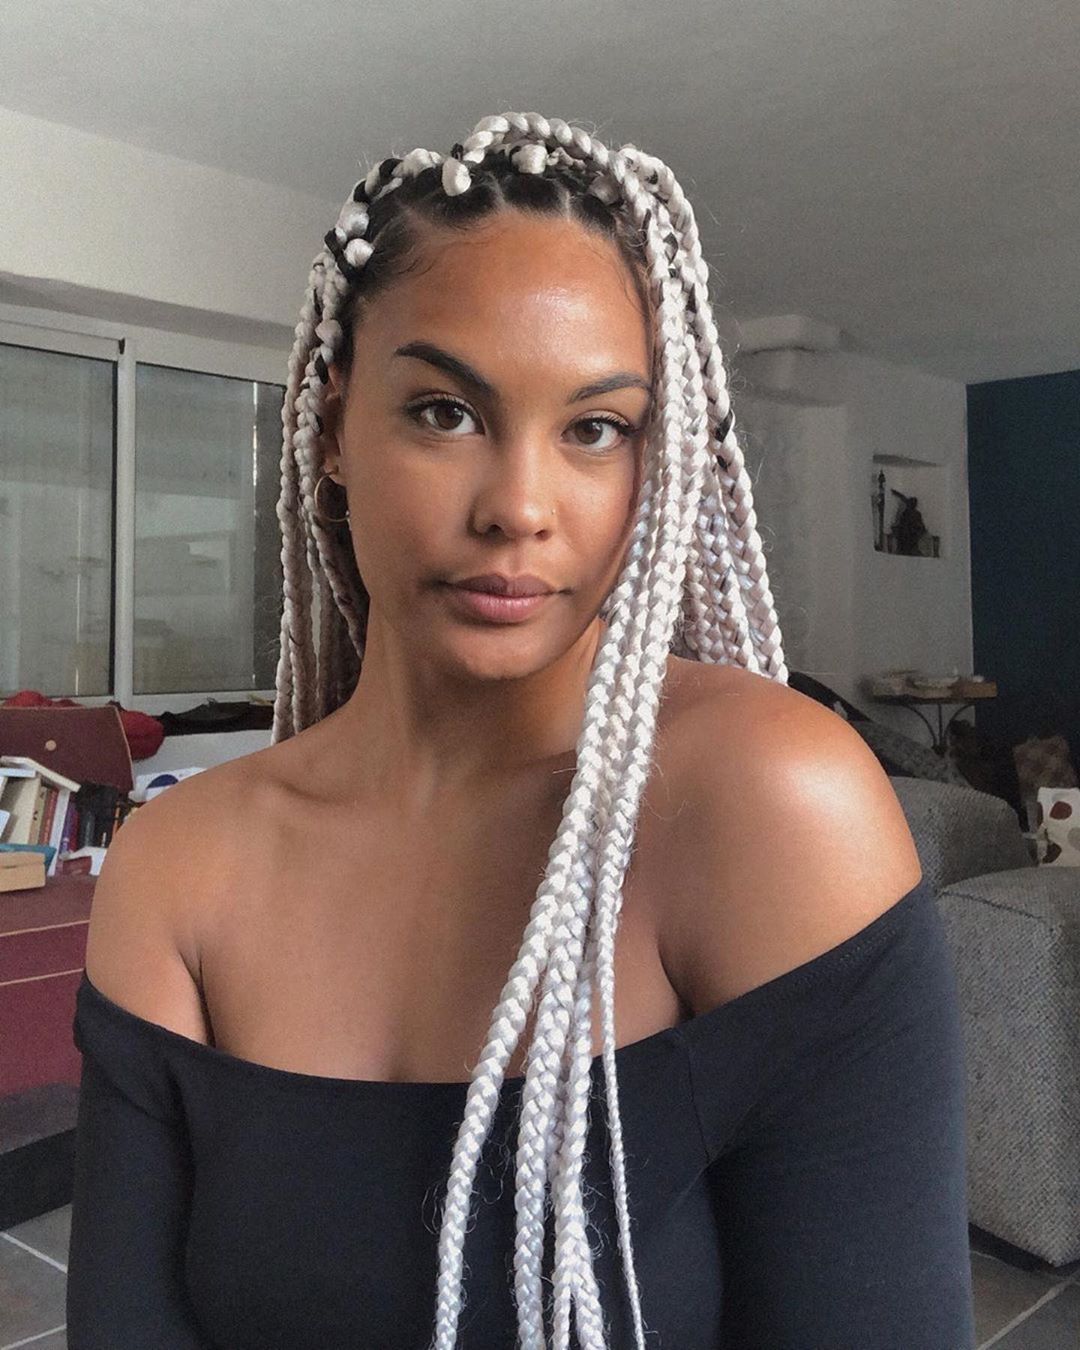 120 African Braids Hairstyle Pictures to Inspire You | ThriveNaija